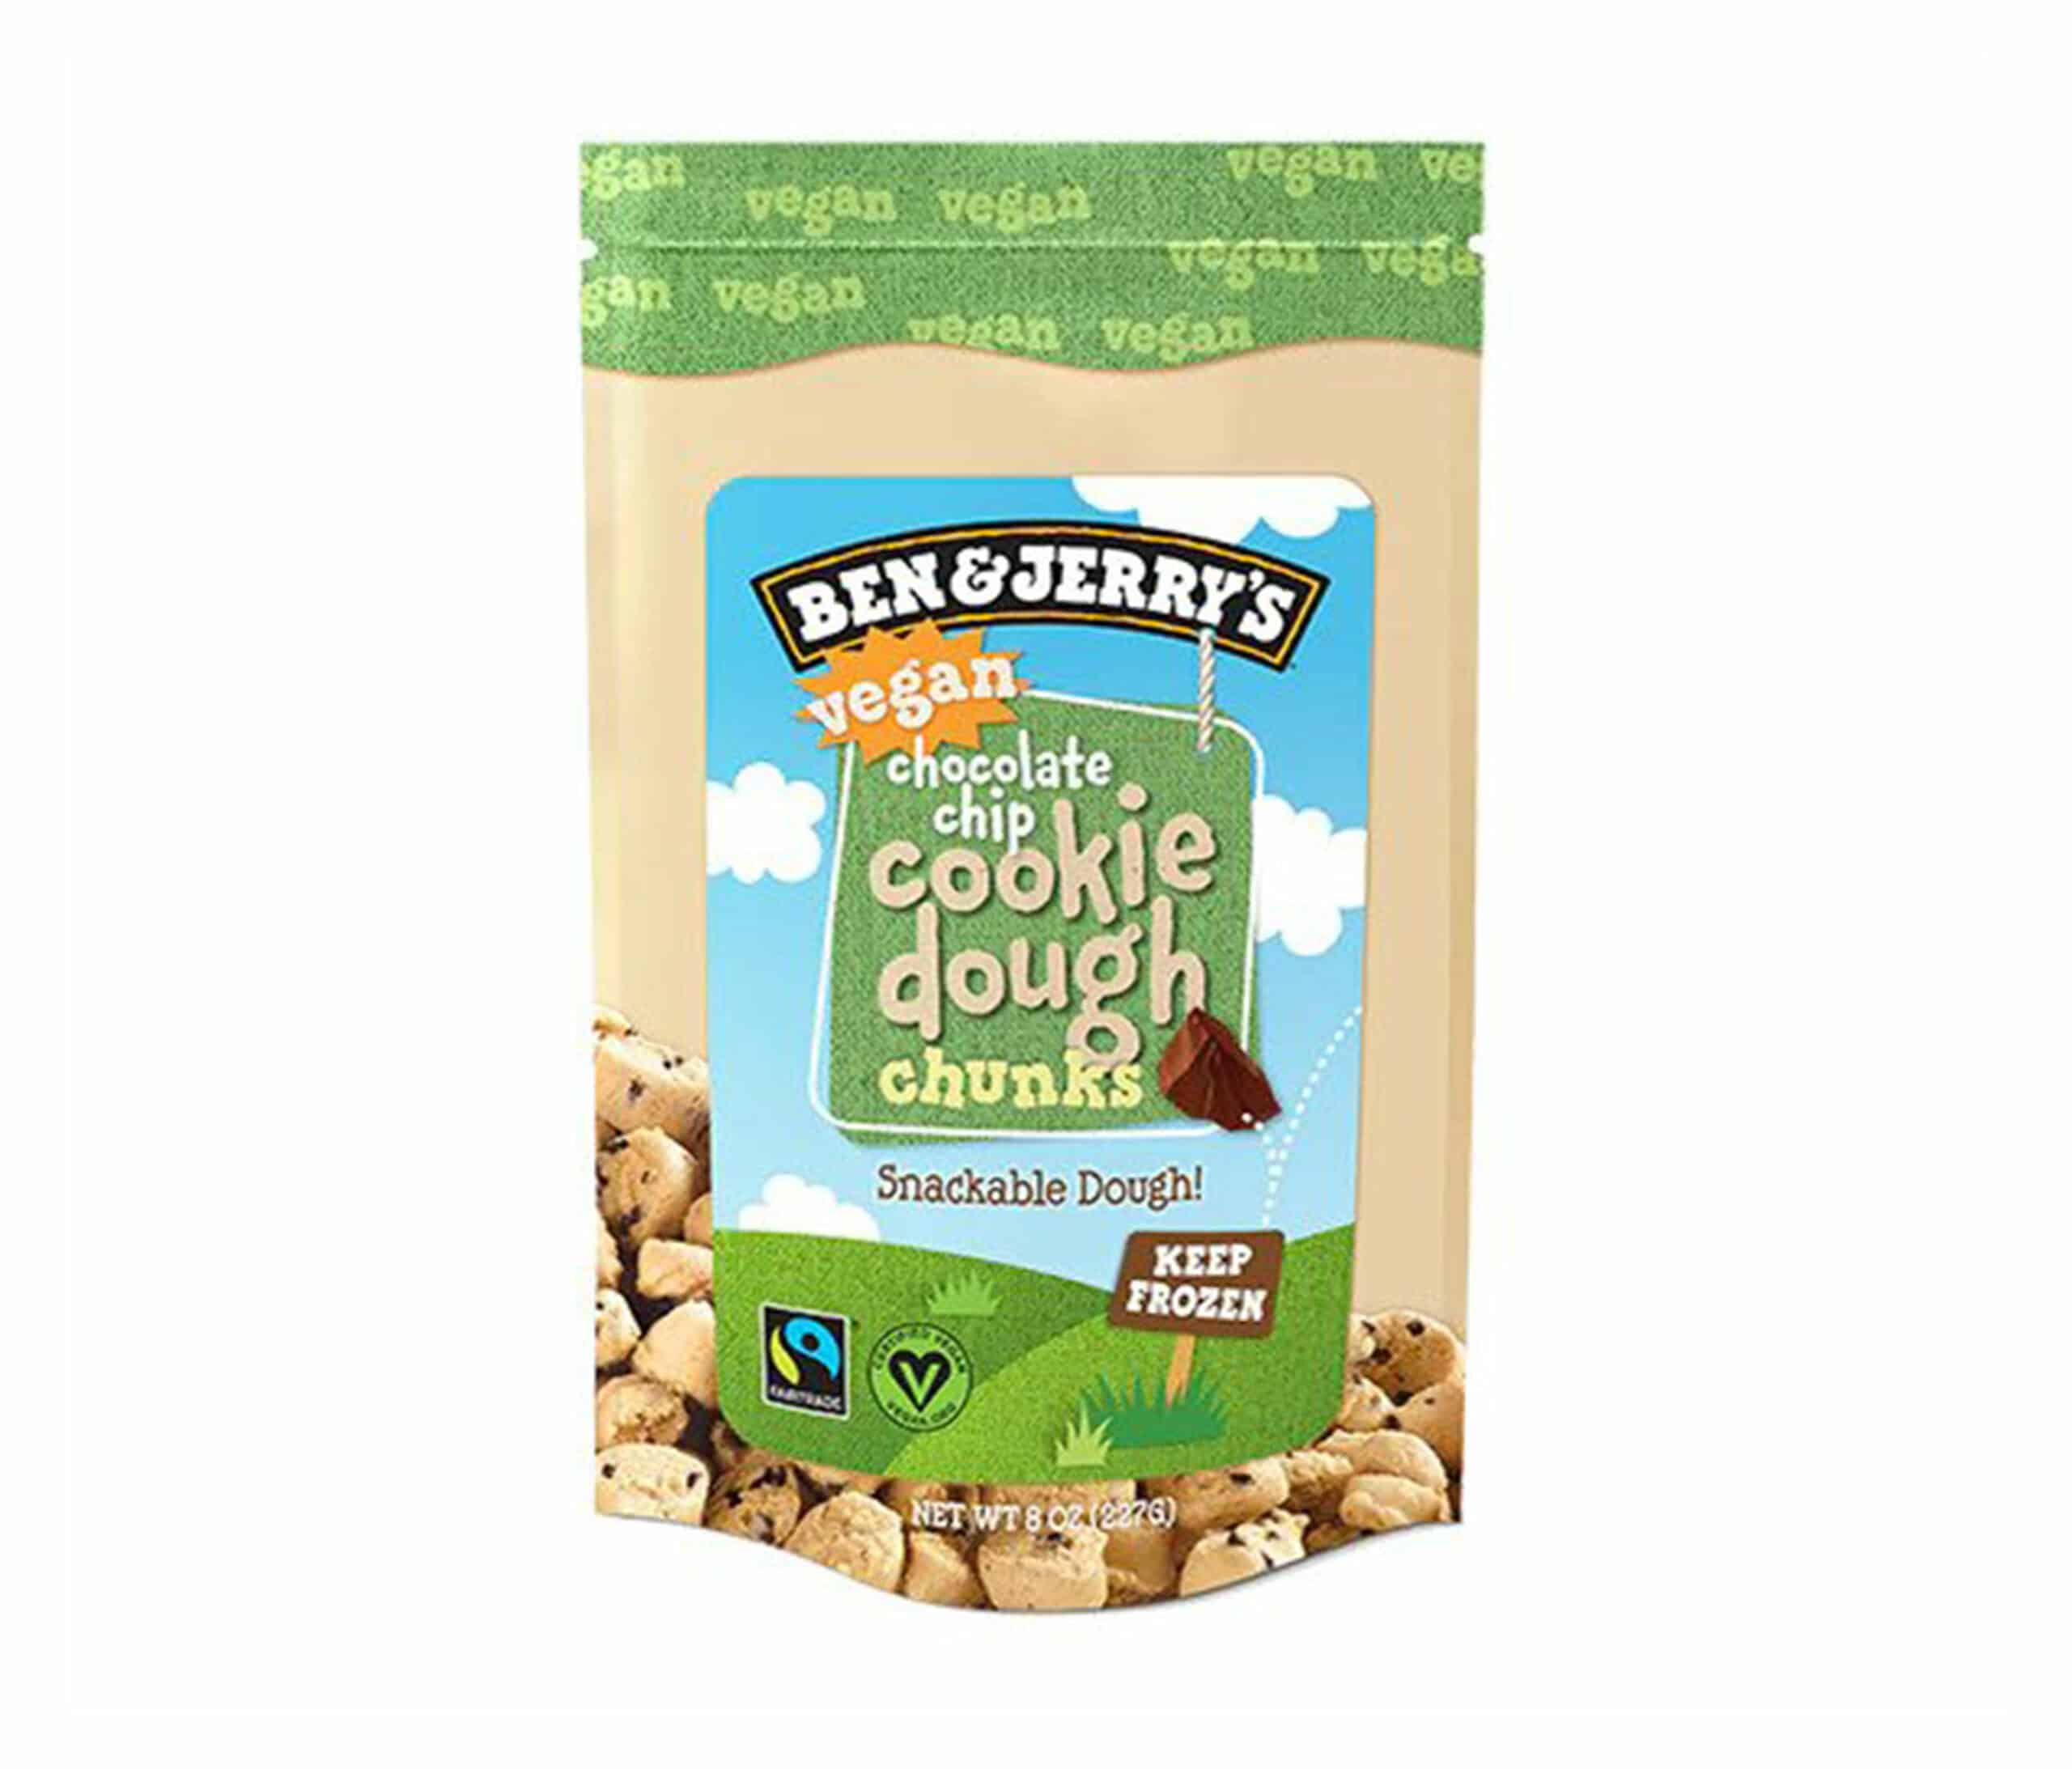 Vegan Chocolate Chip Cookie Dough Chunks by Ben & Jerry's